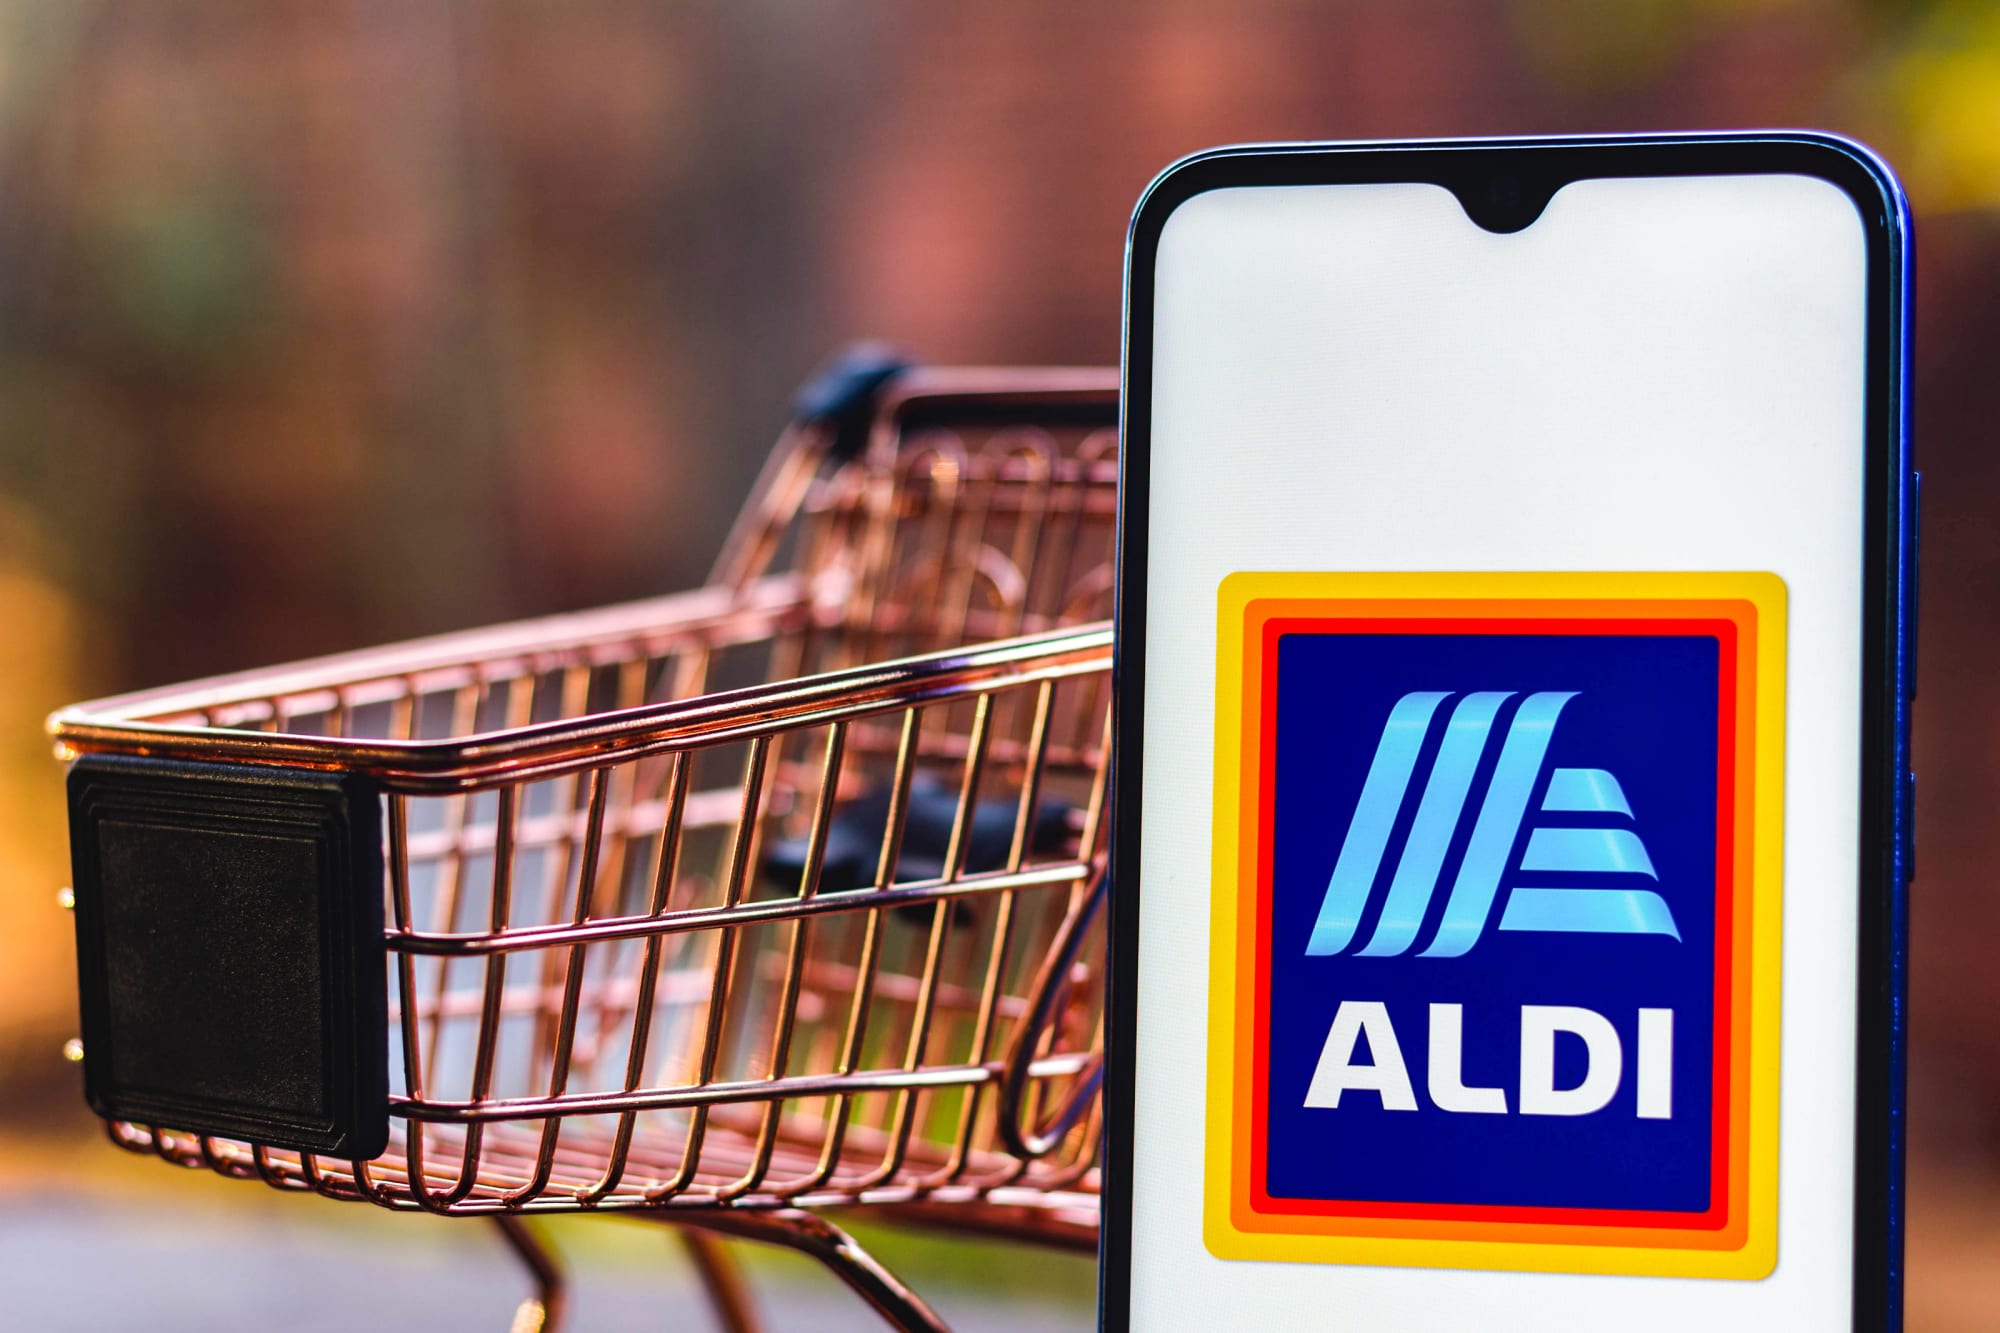 ALDI wants shoppers to know holiday shopping may look different this year